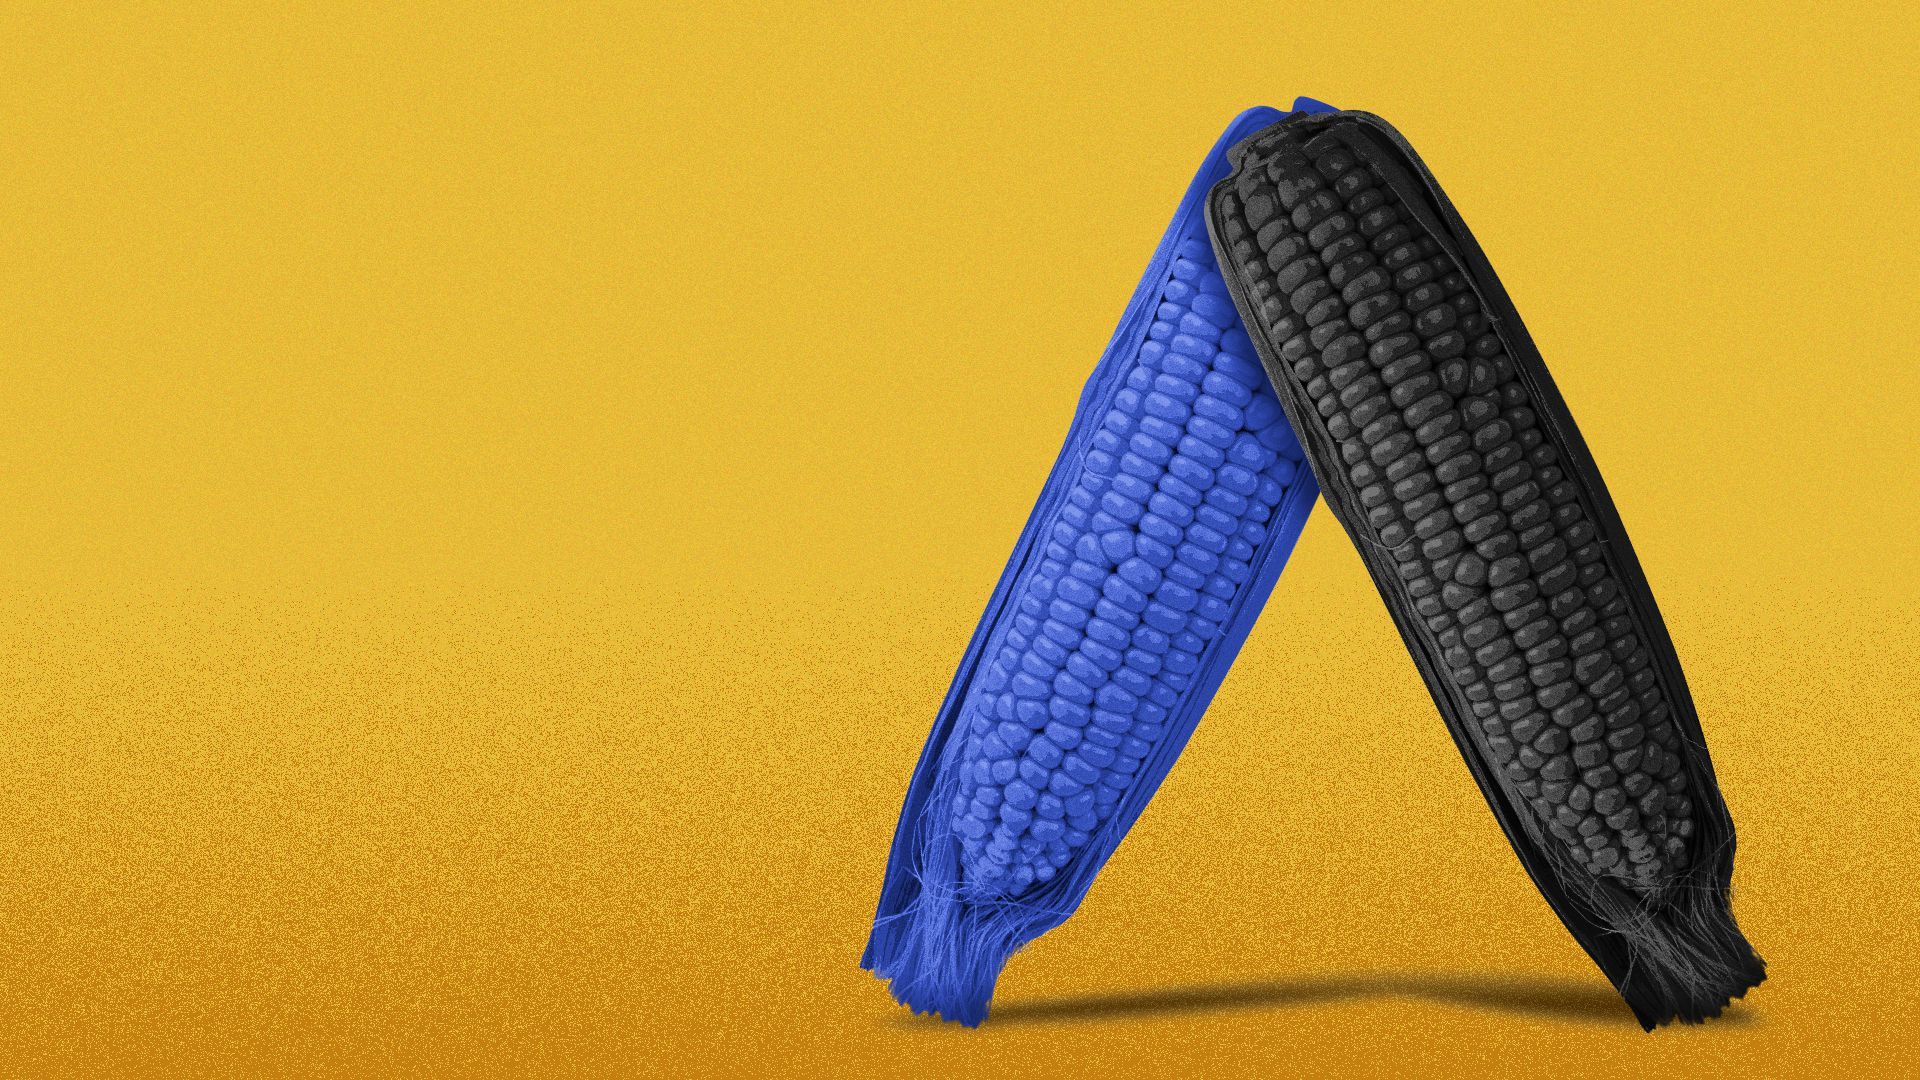 Illustration of the Axios logo made out of corn.